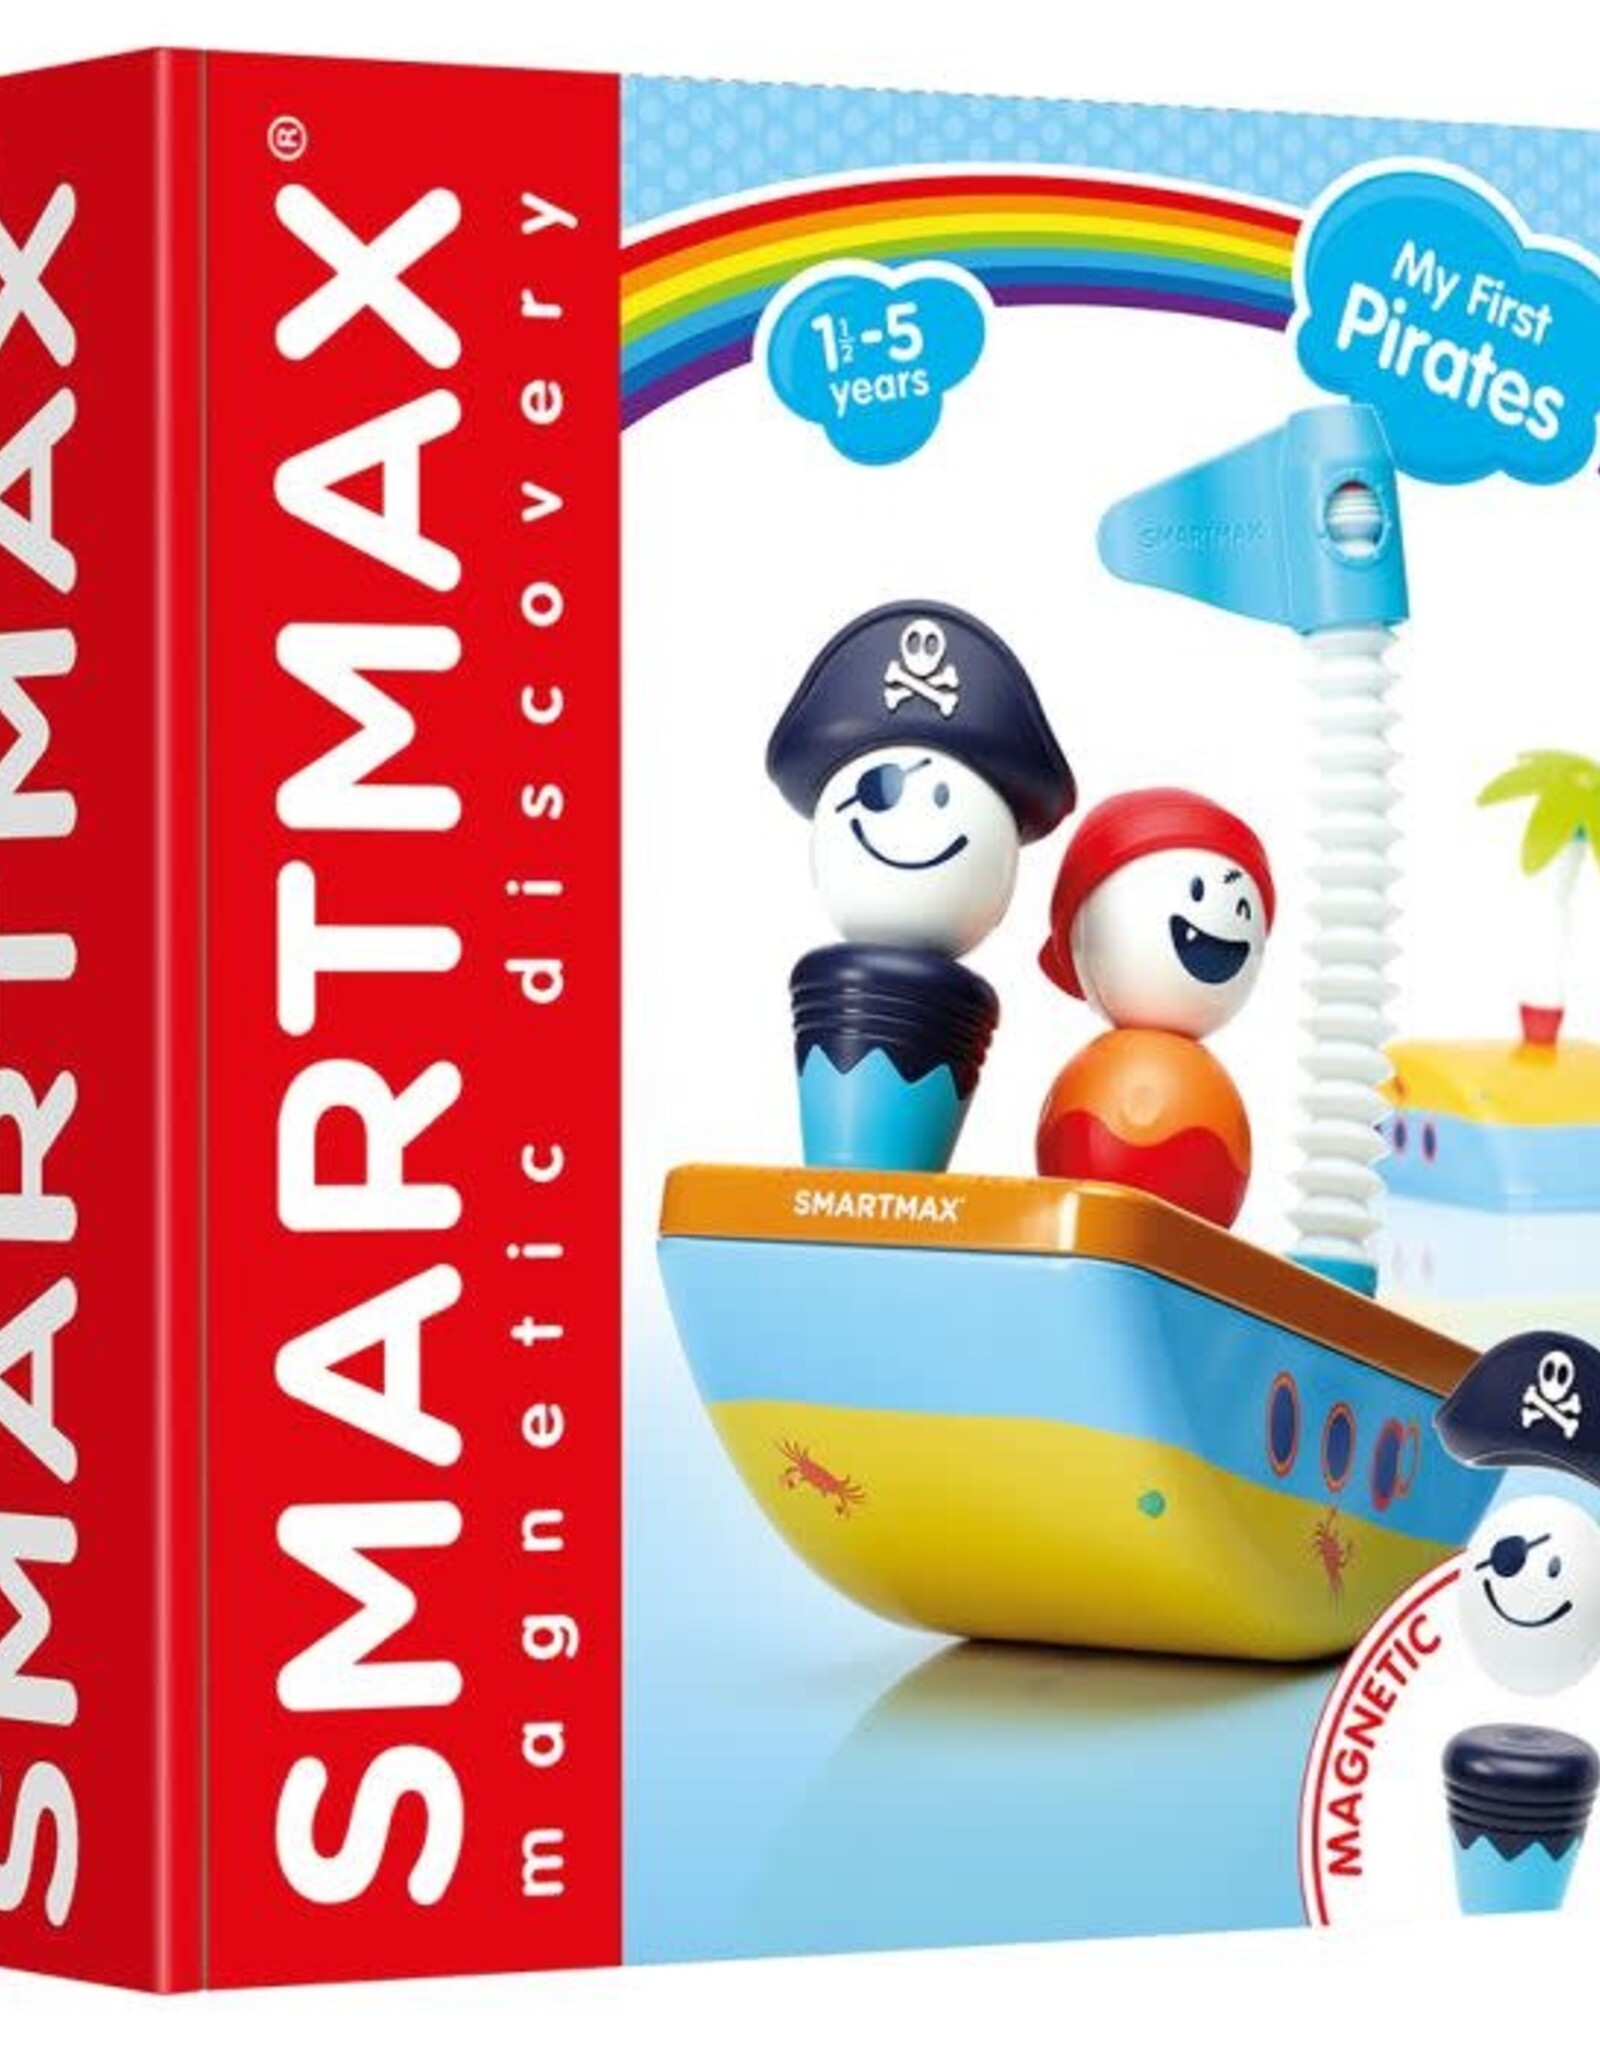 Smart Toys & Games SmartMax My First Pirates